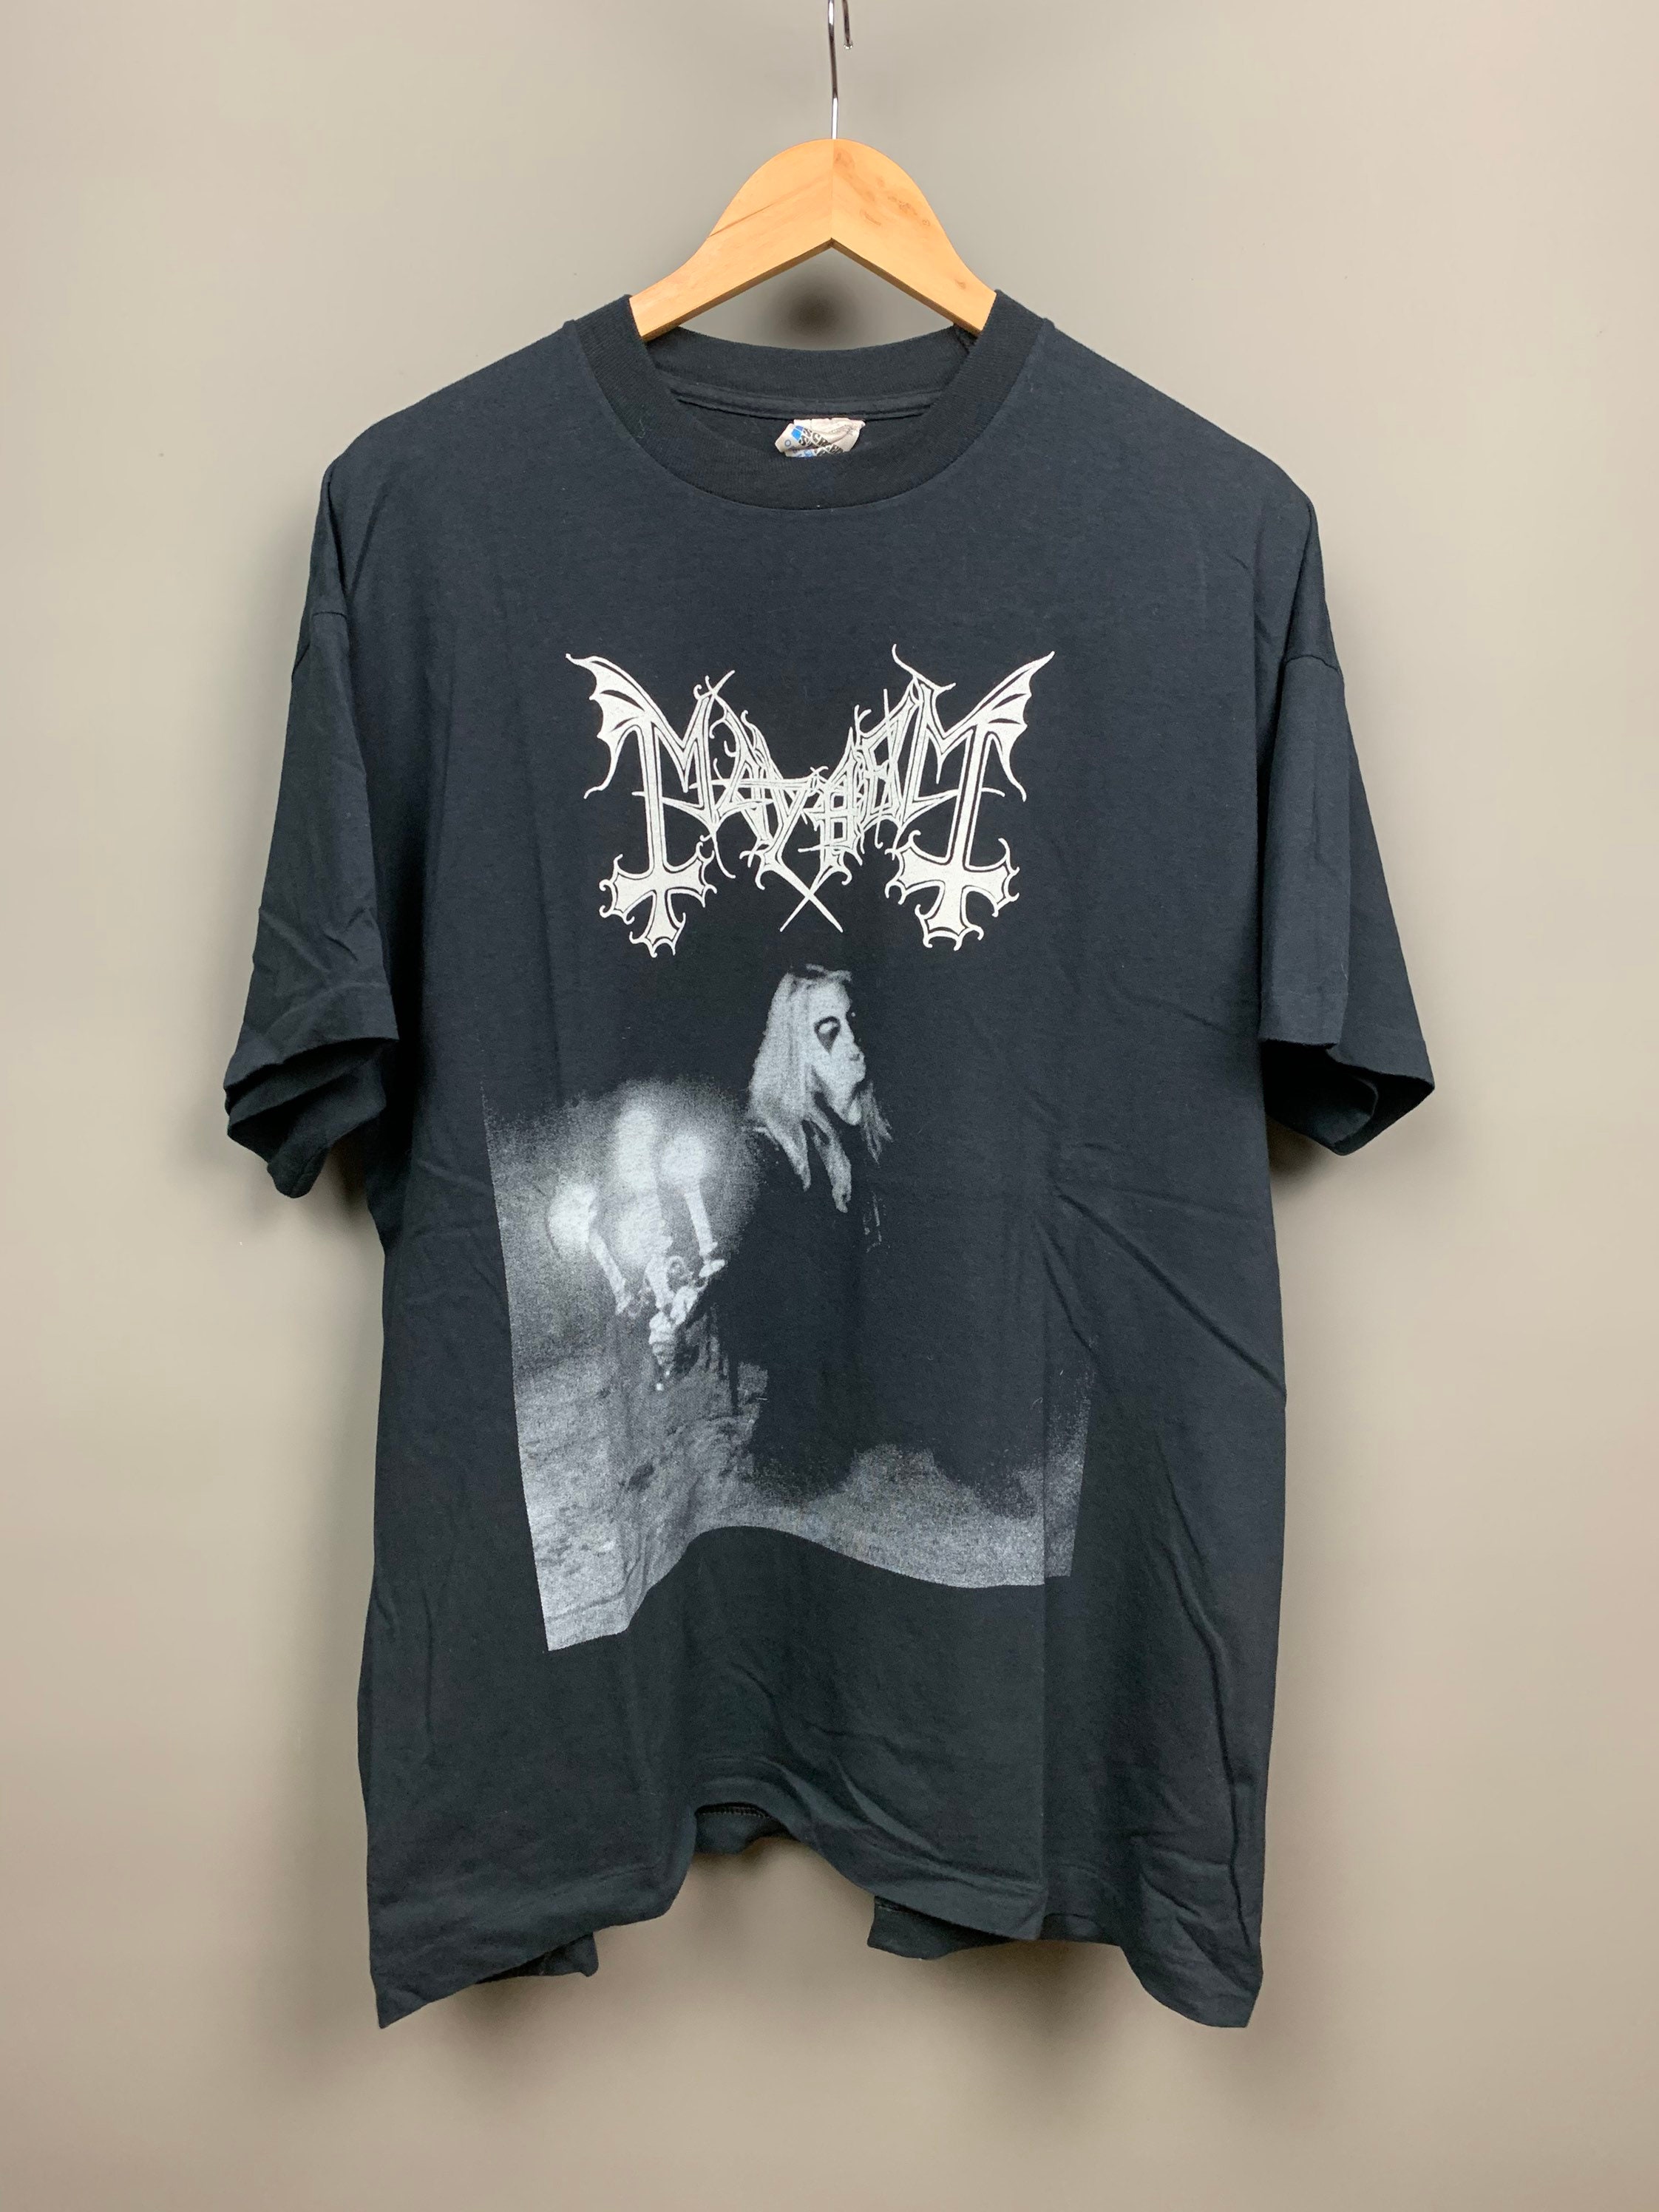 MAYHEM 1997 Died by His Own Hands Vintage T-shirt / RARE / Single